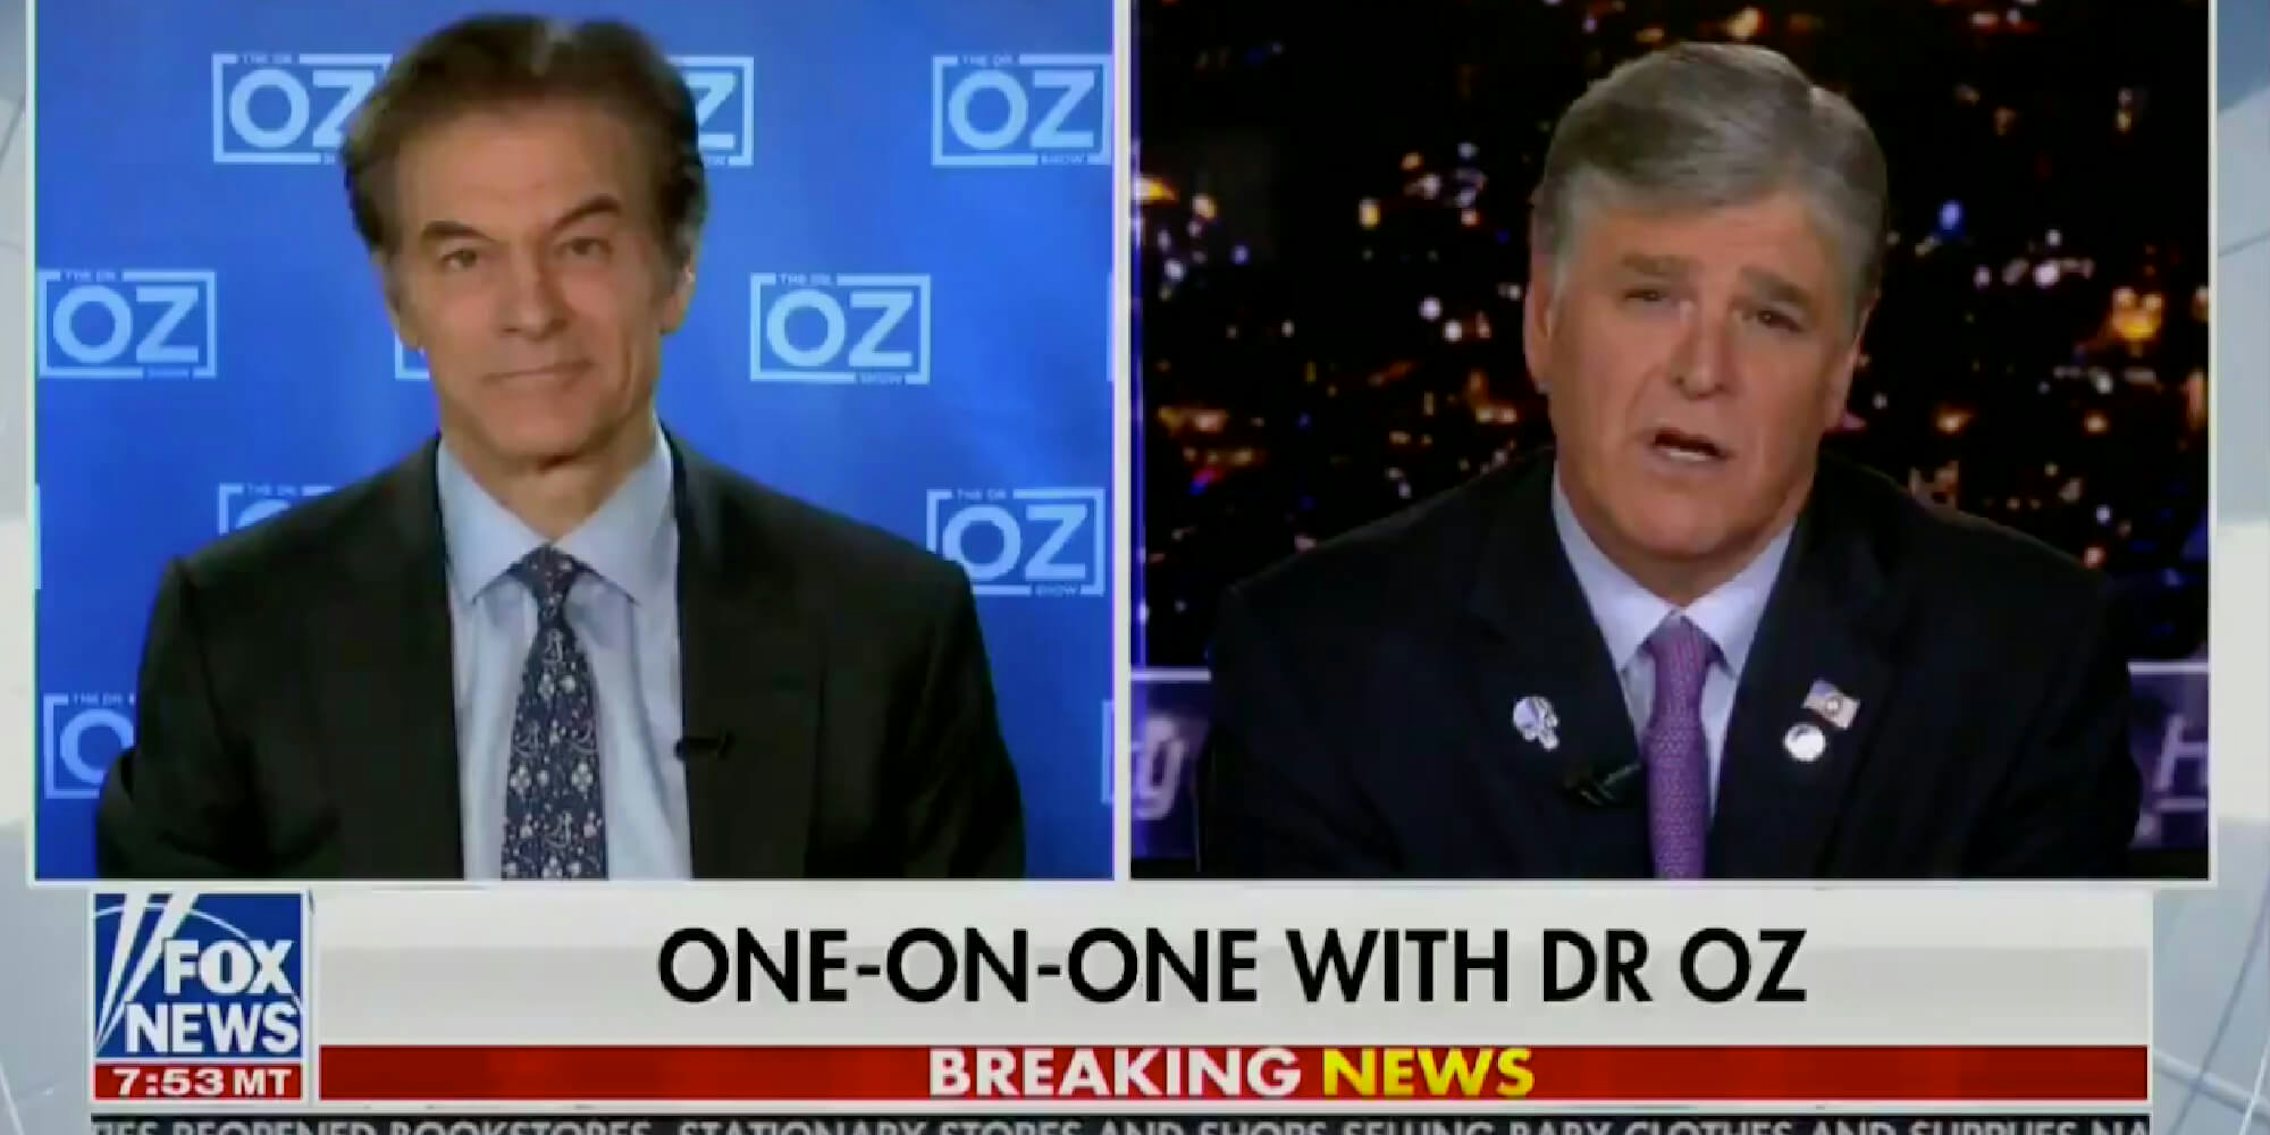 Dr. Oz on Sean Hannity suggesting reopening schools